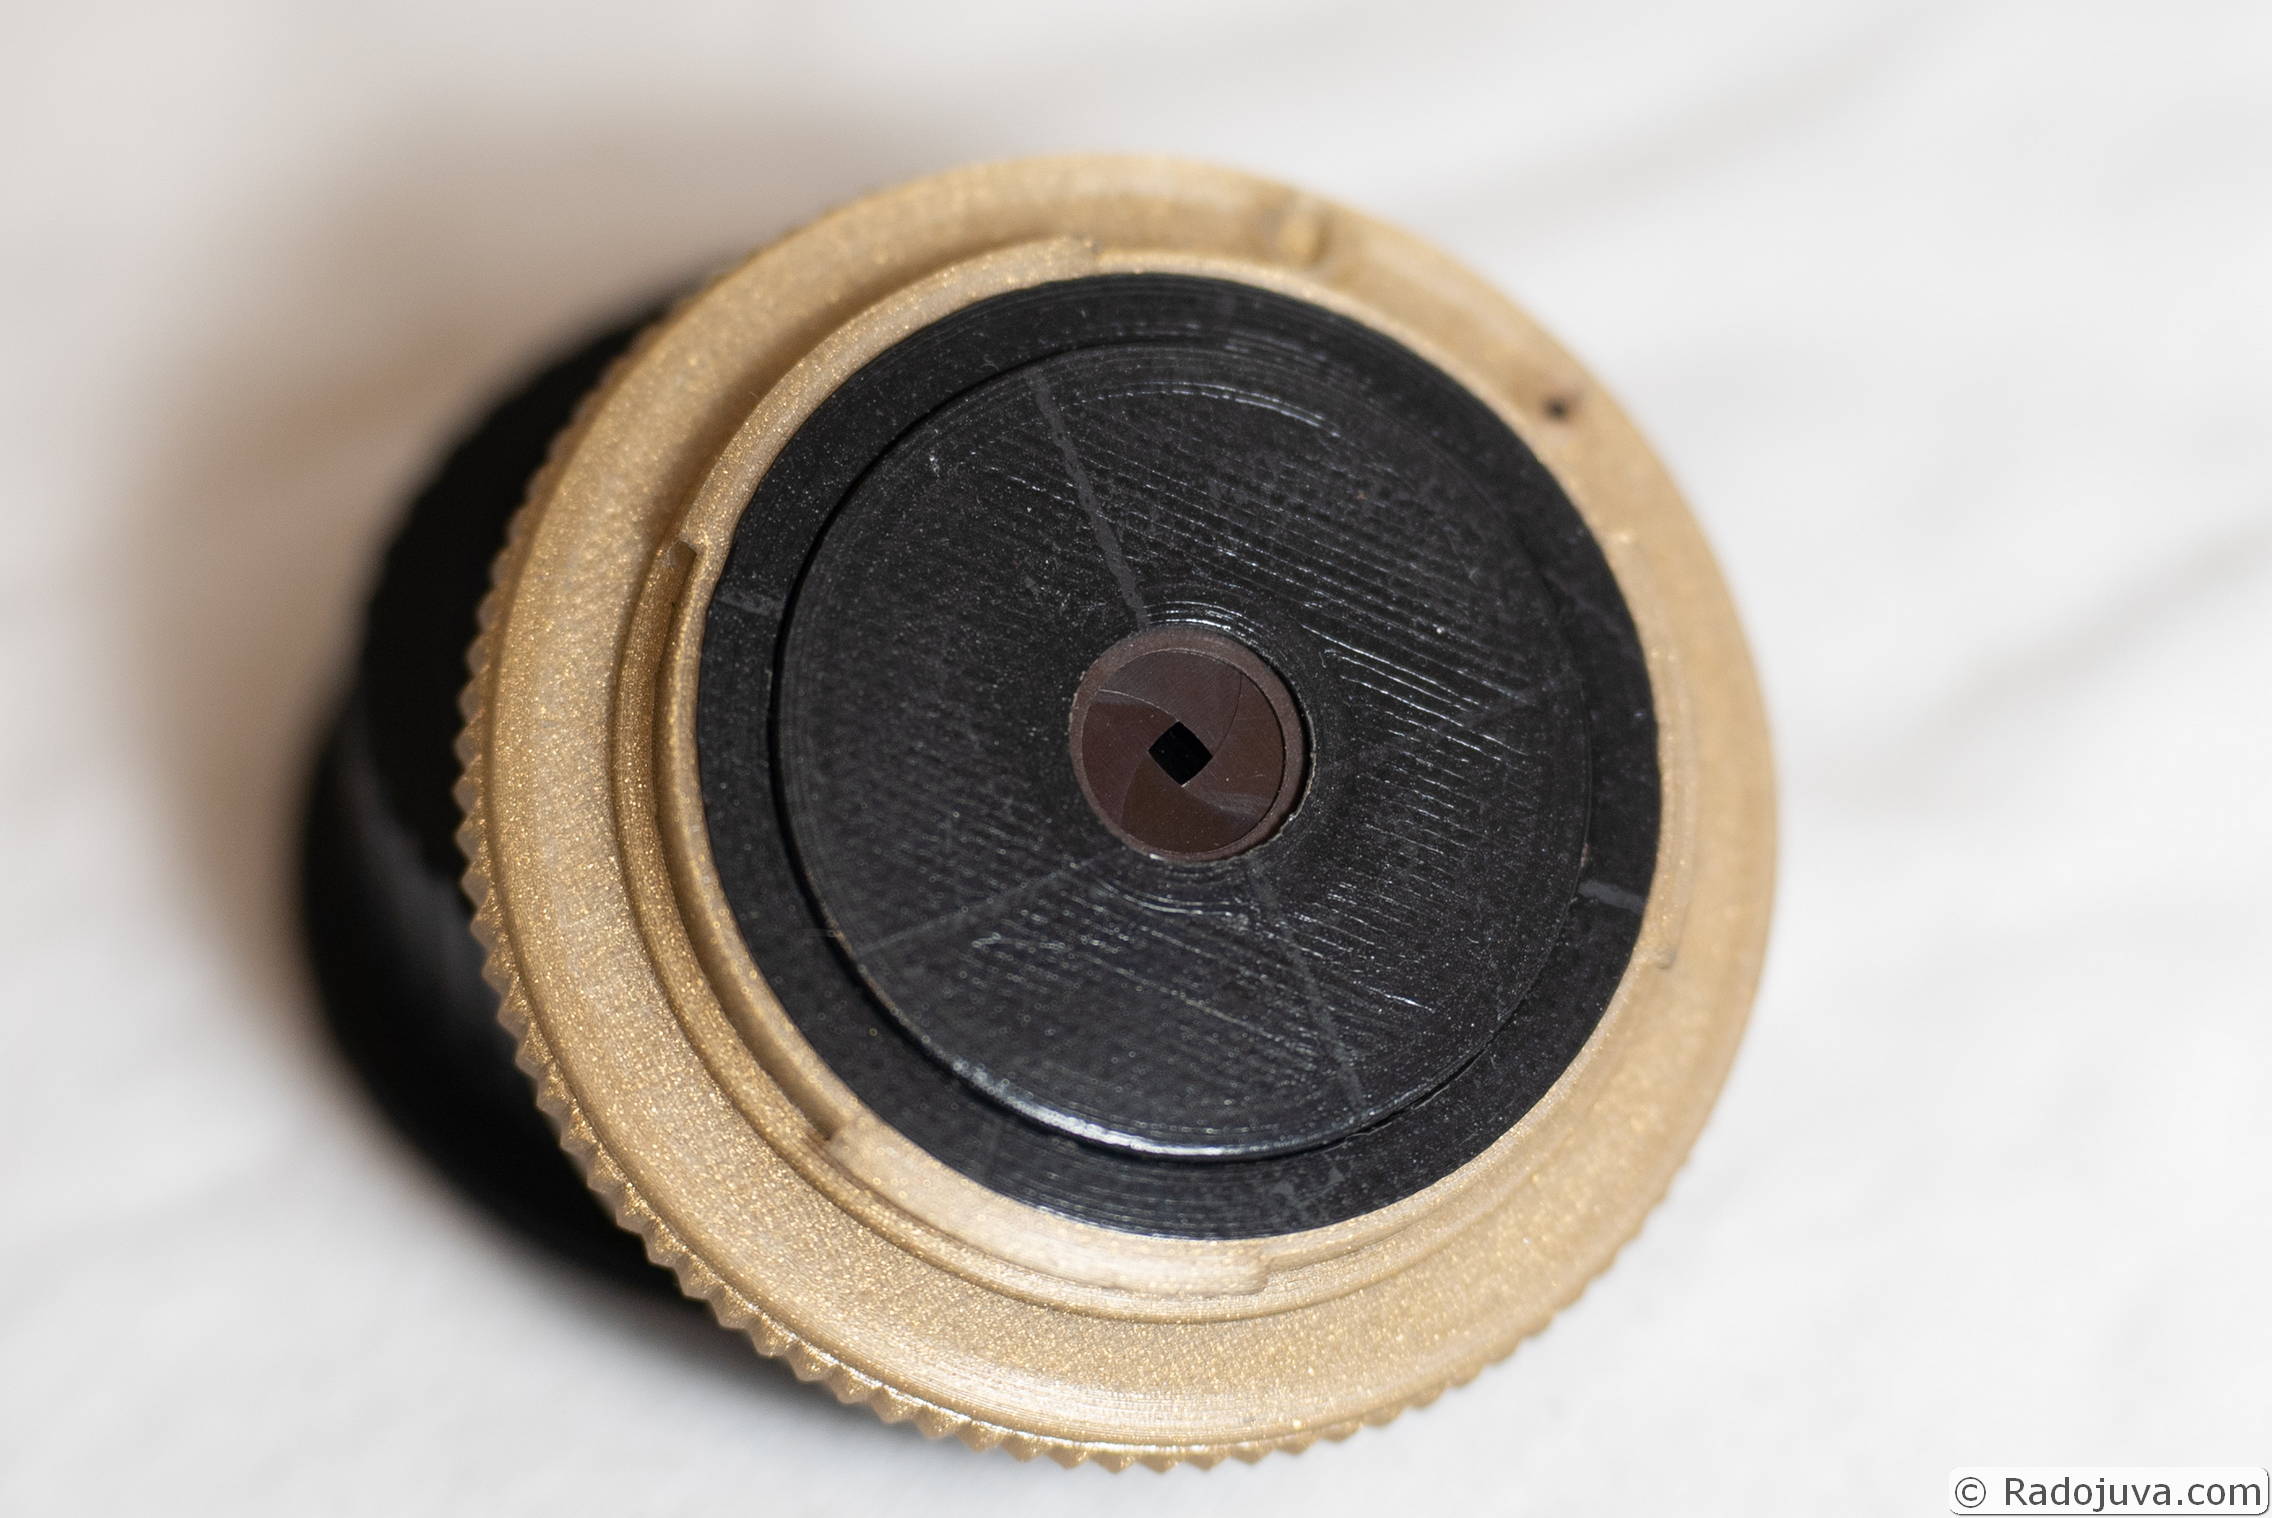 View of the lens from the side of the rear lens with the aperture closed to F / 16.